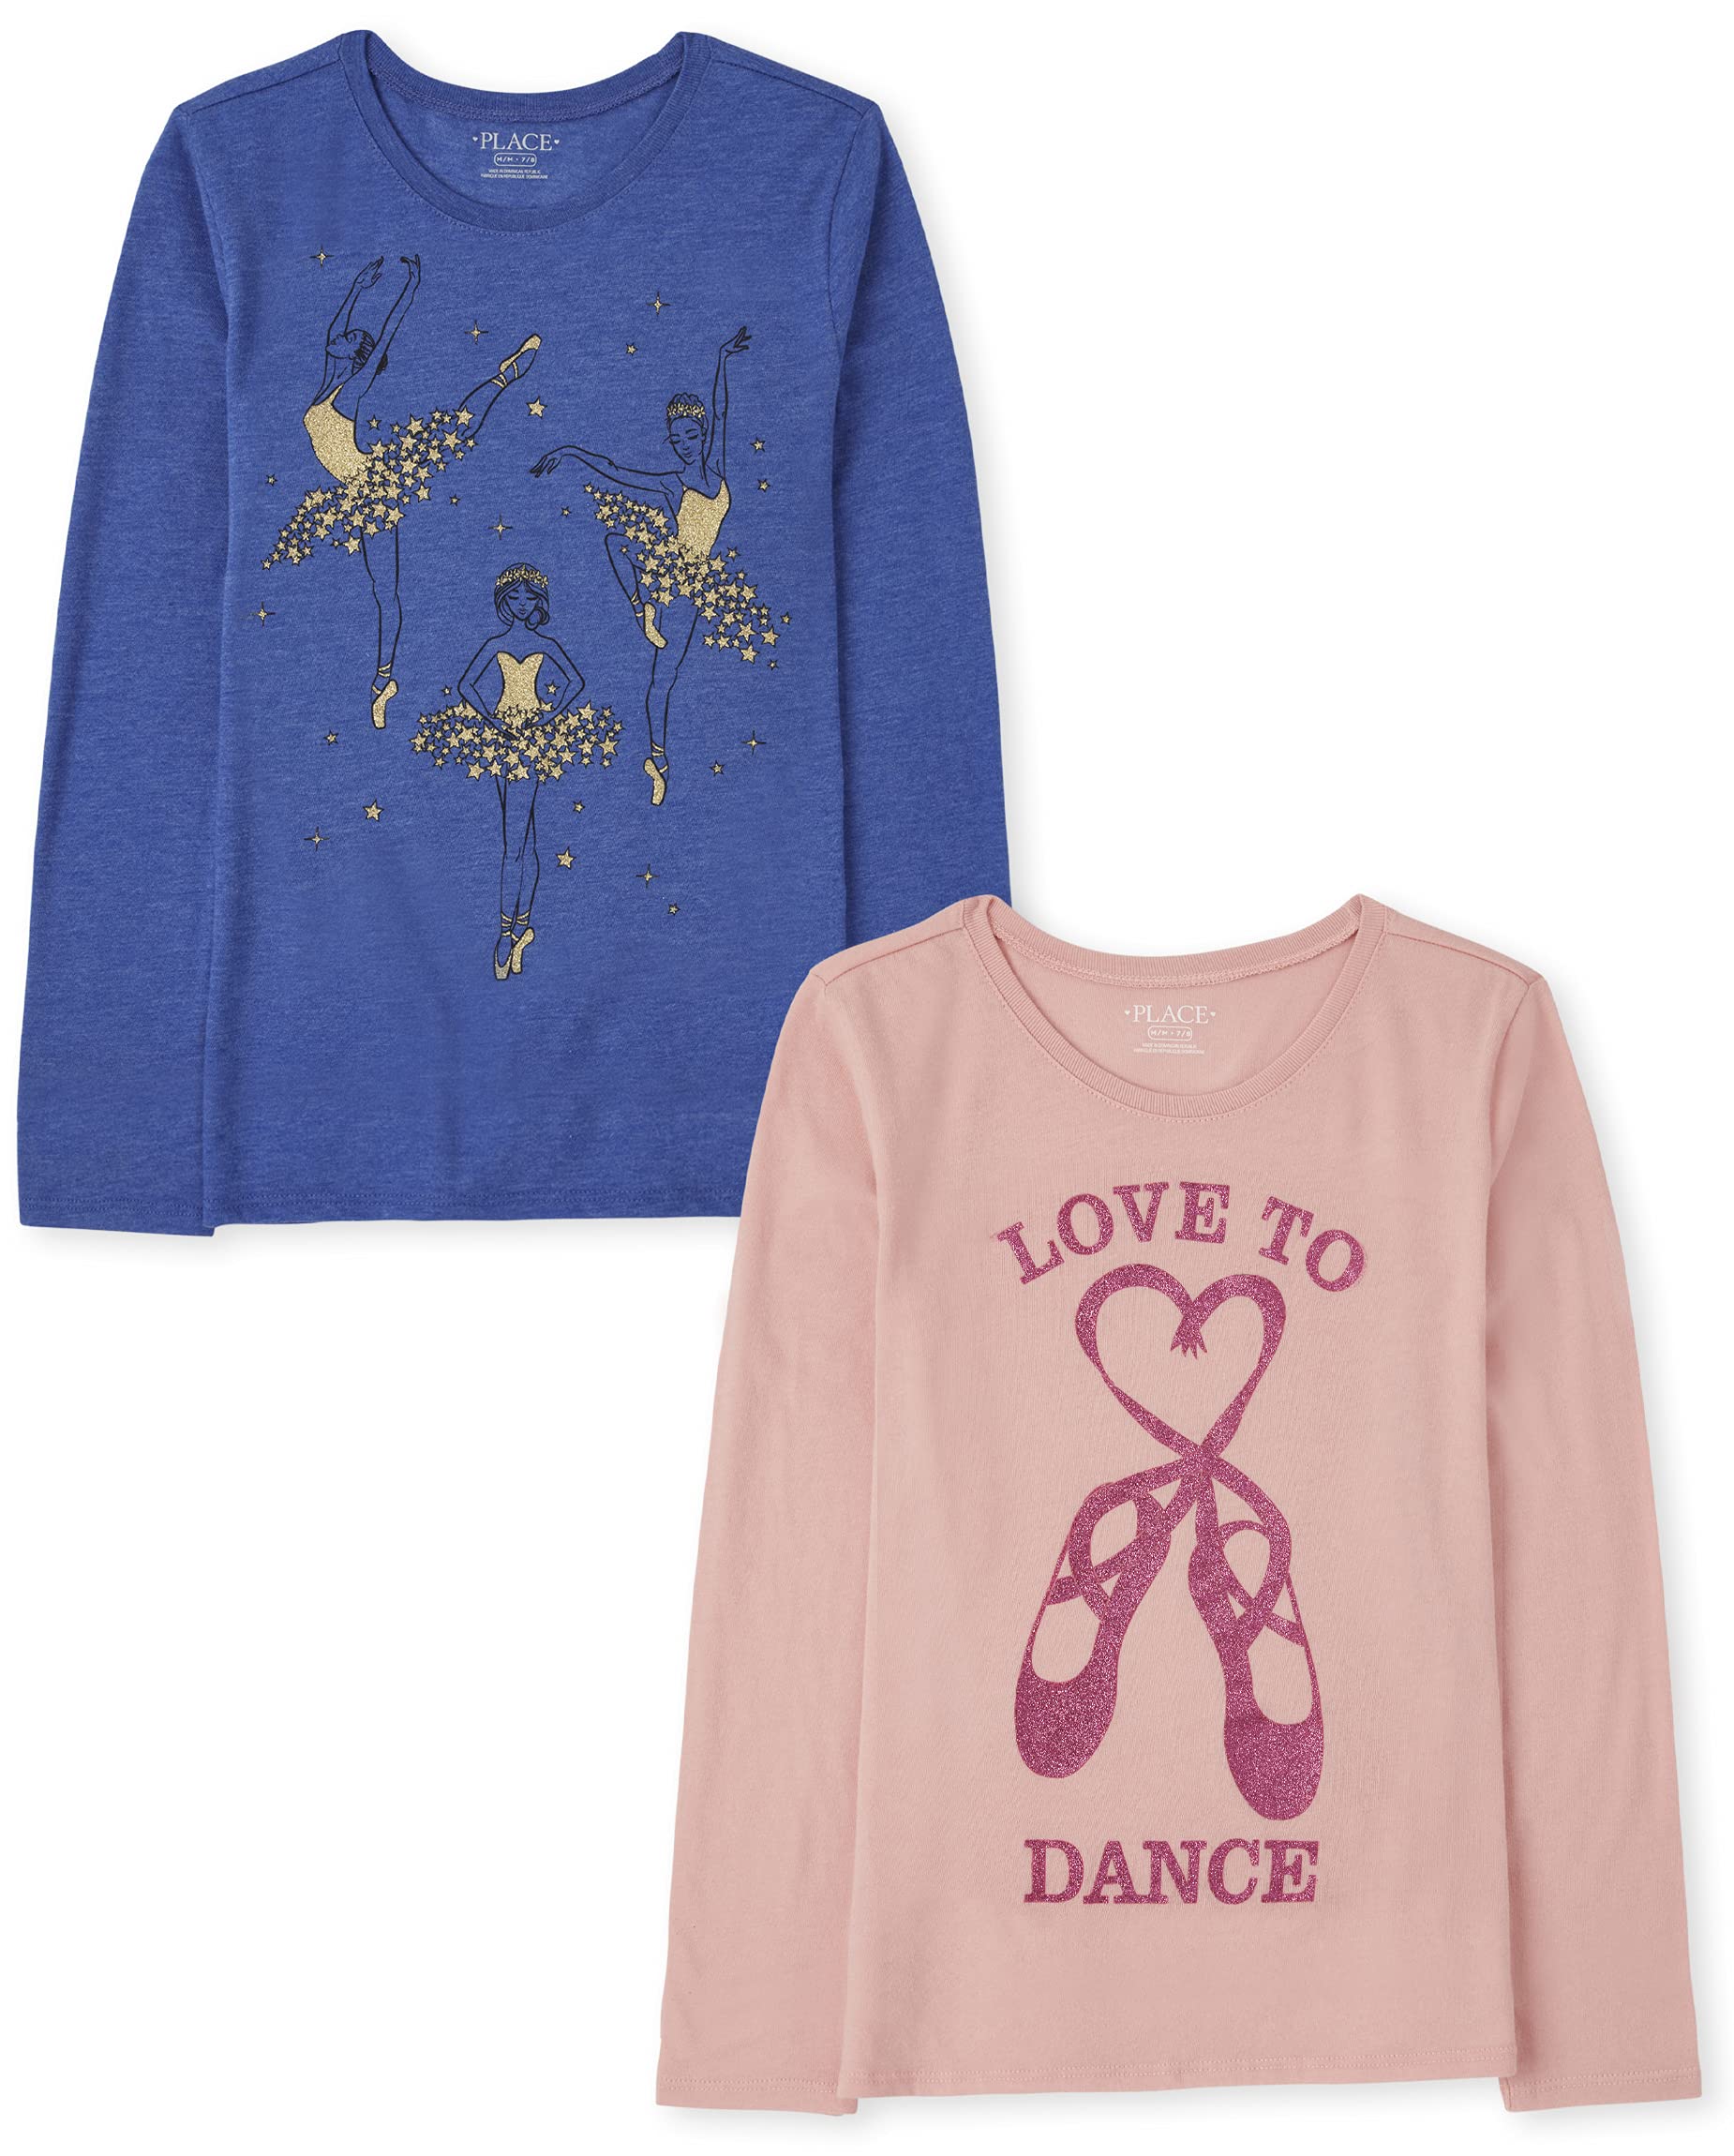 The Children's Place girls Long Sleeve Graphic T shirt 2 Pack